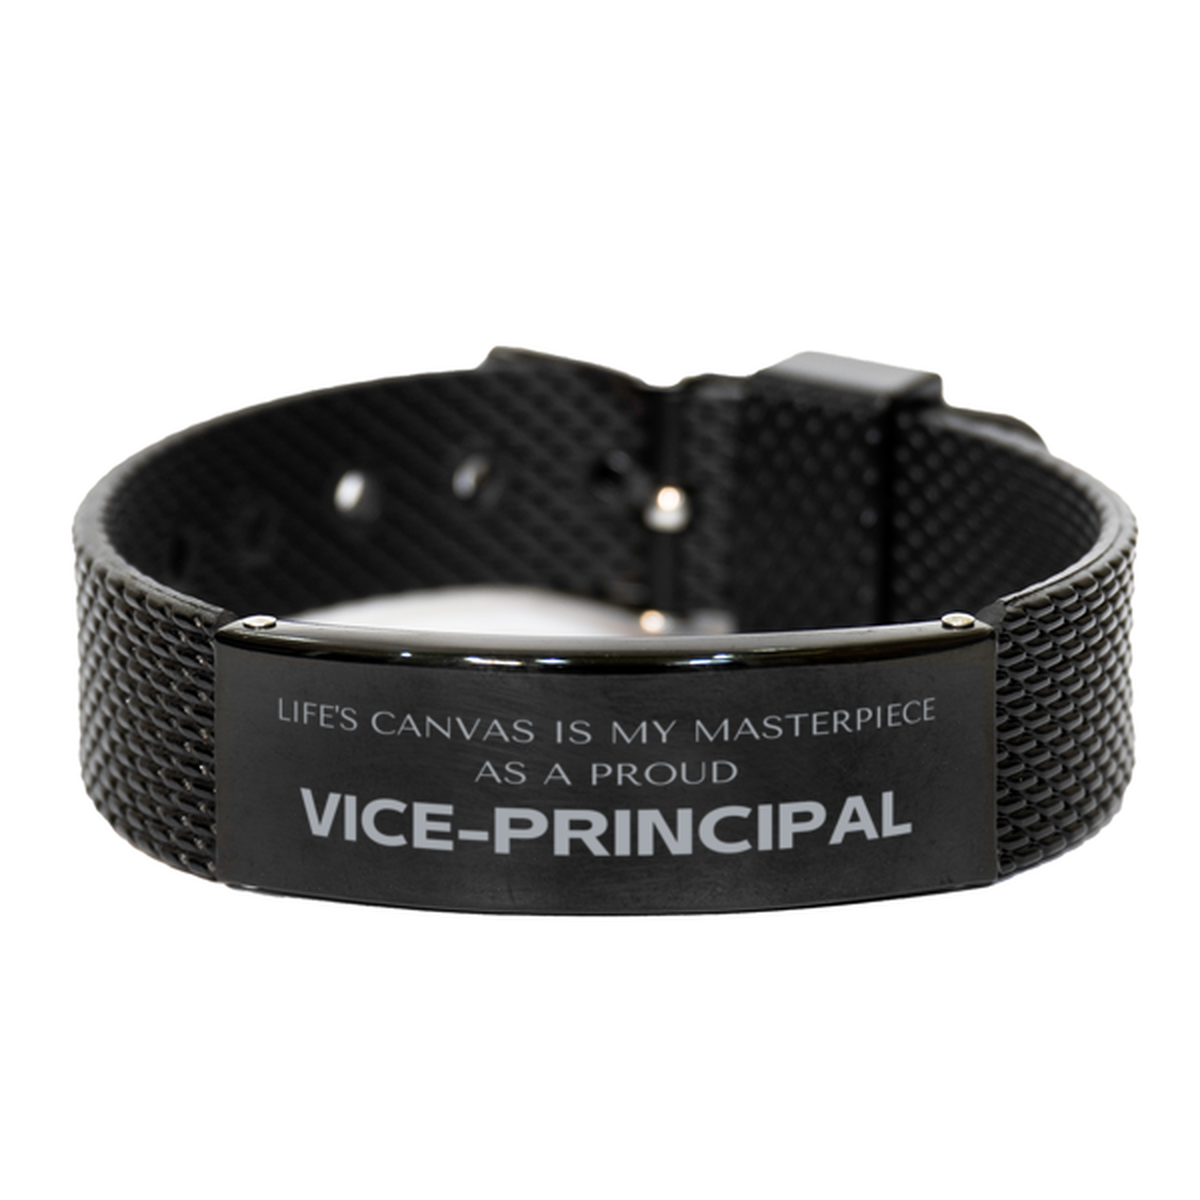 Proud Vice-principal Gifts, Life's canvas is my masterpiece, Epic Birthday Christmas Unique Black Shark Mesh Bracelet For Vice-principal, Coworkers, Men, Women, Friends